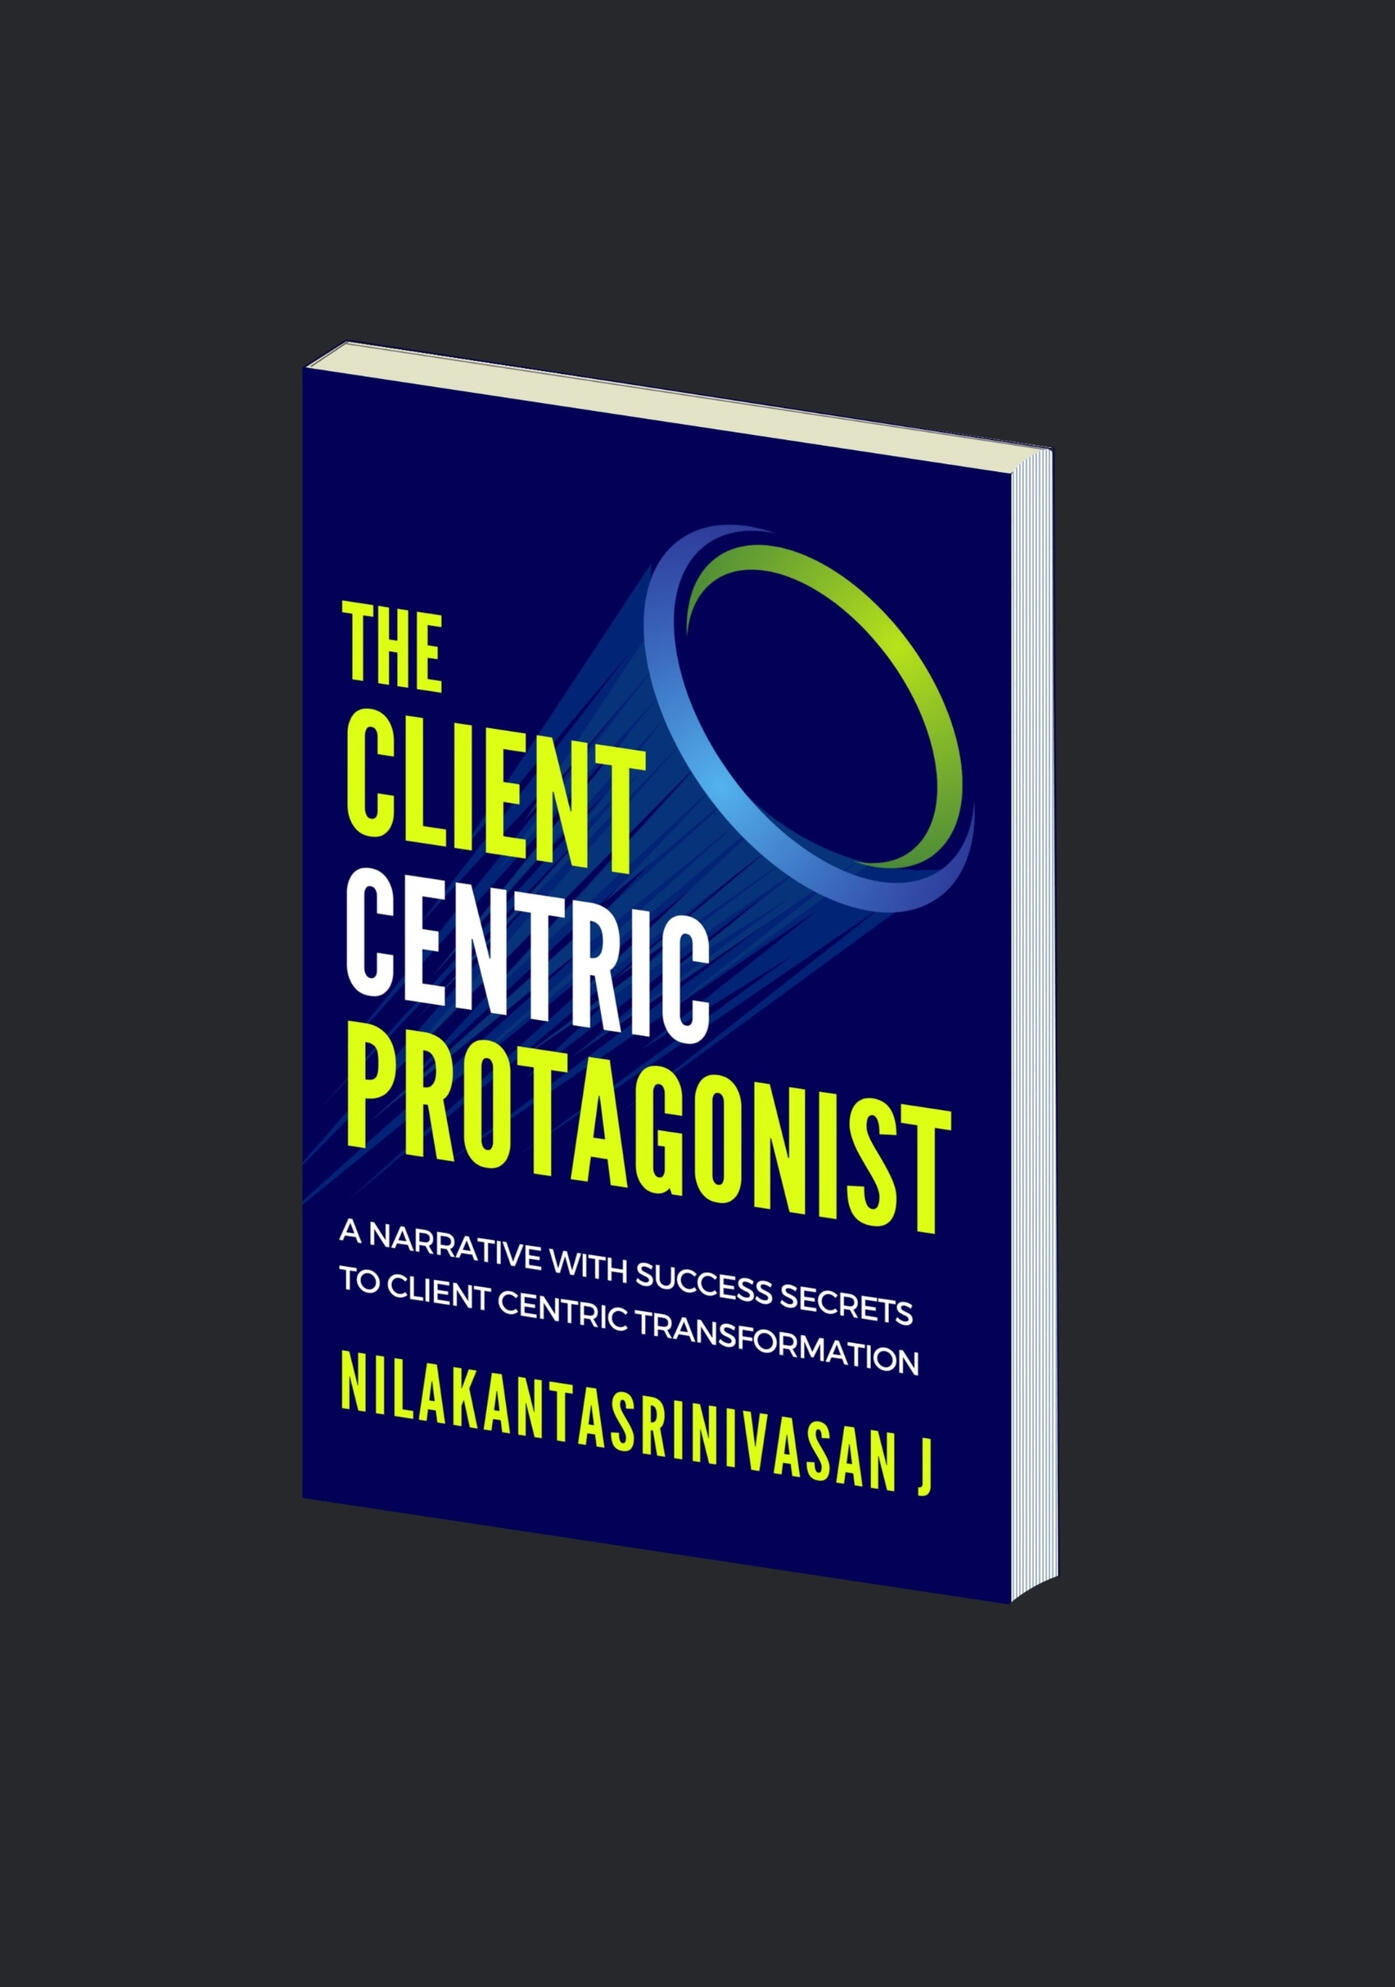 The Client Centric Protagonist